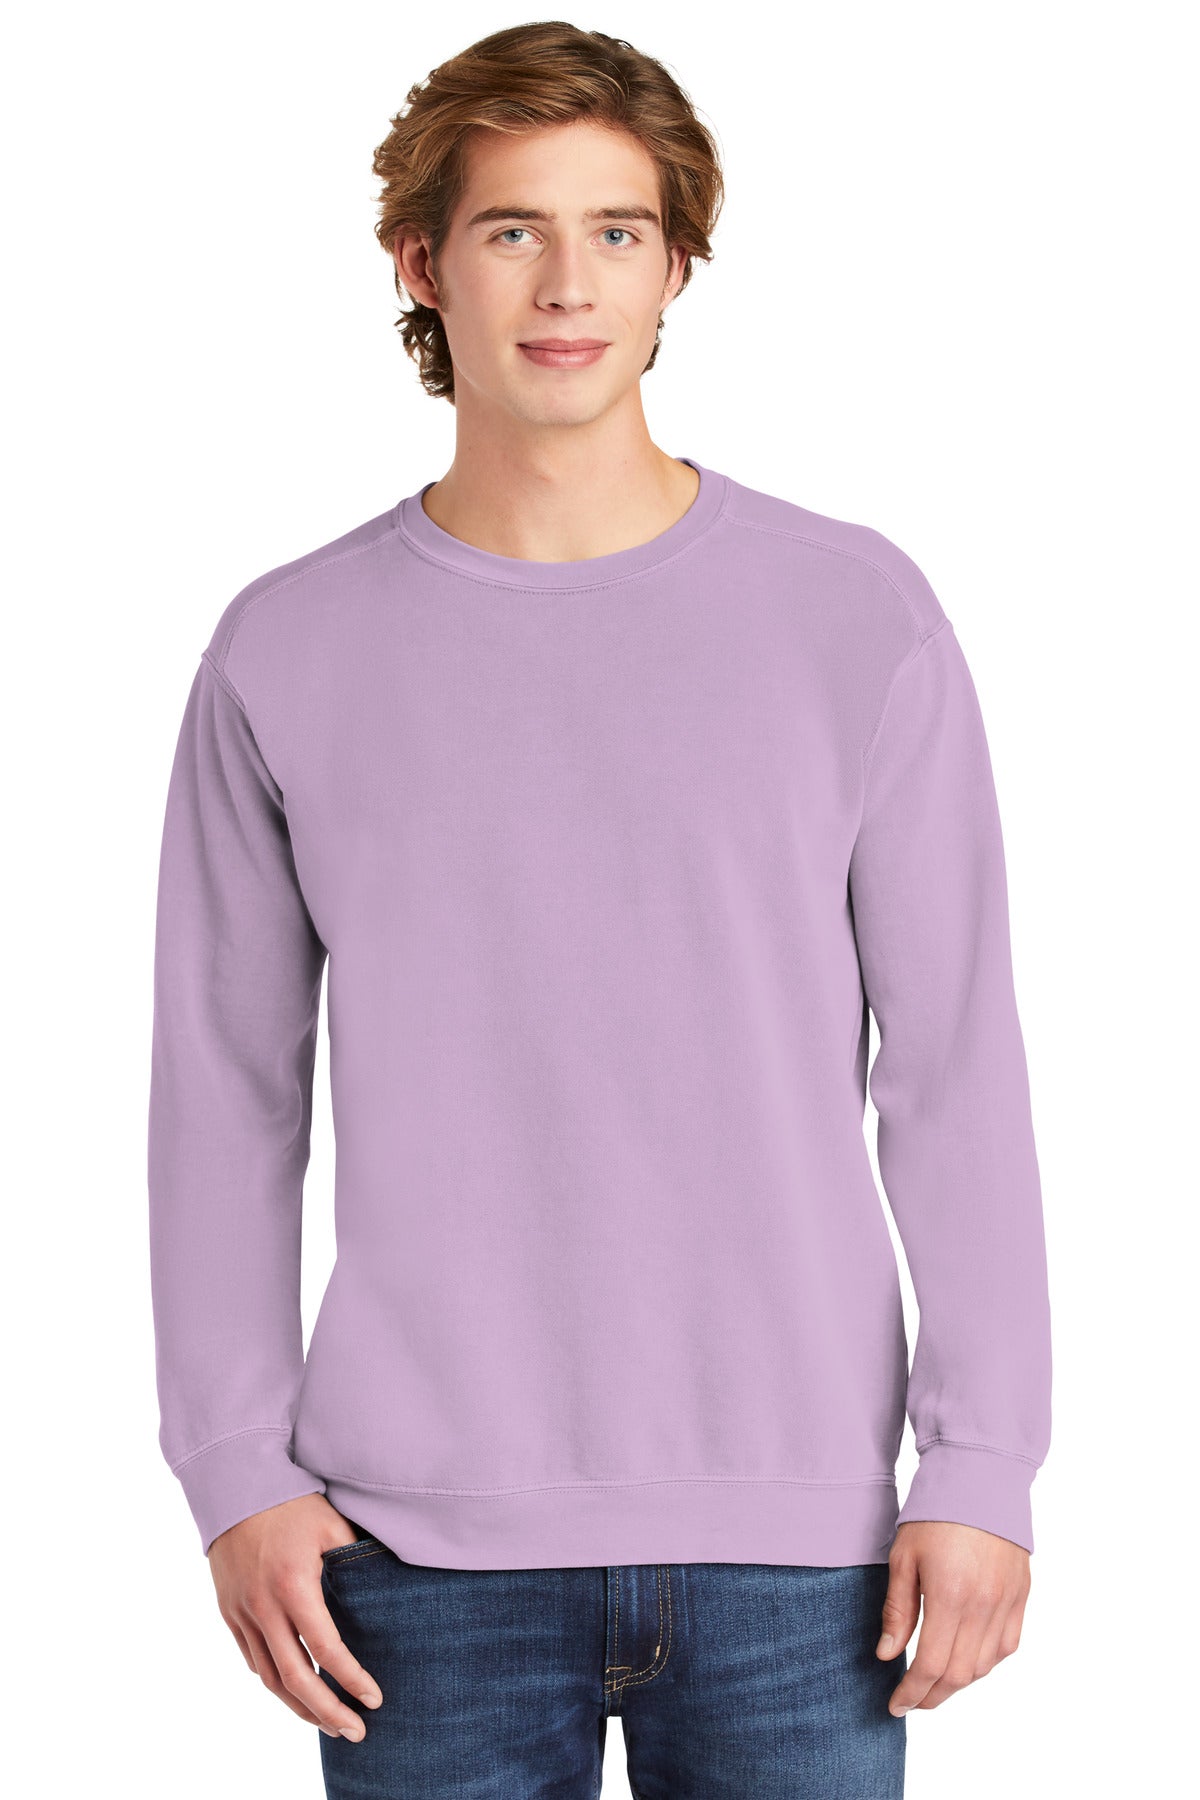 1566-Orchid-2XL